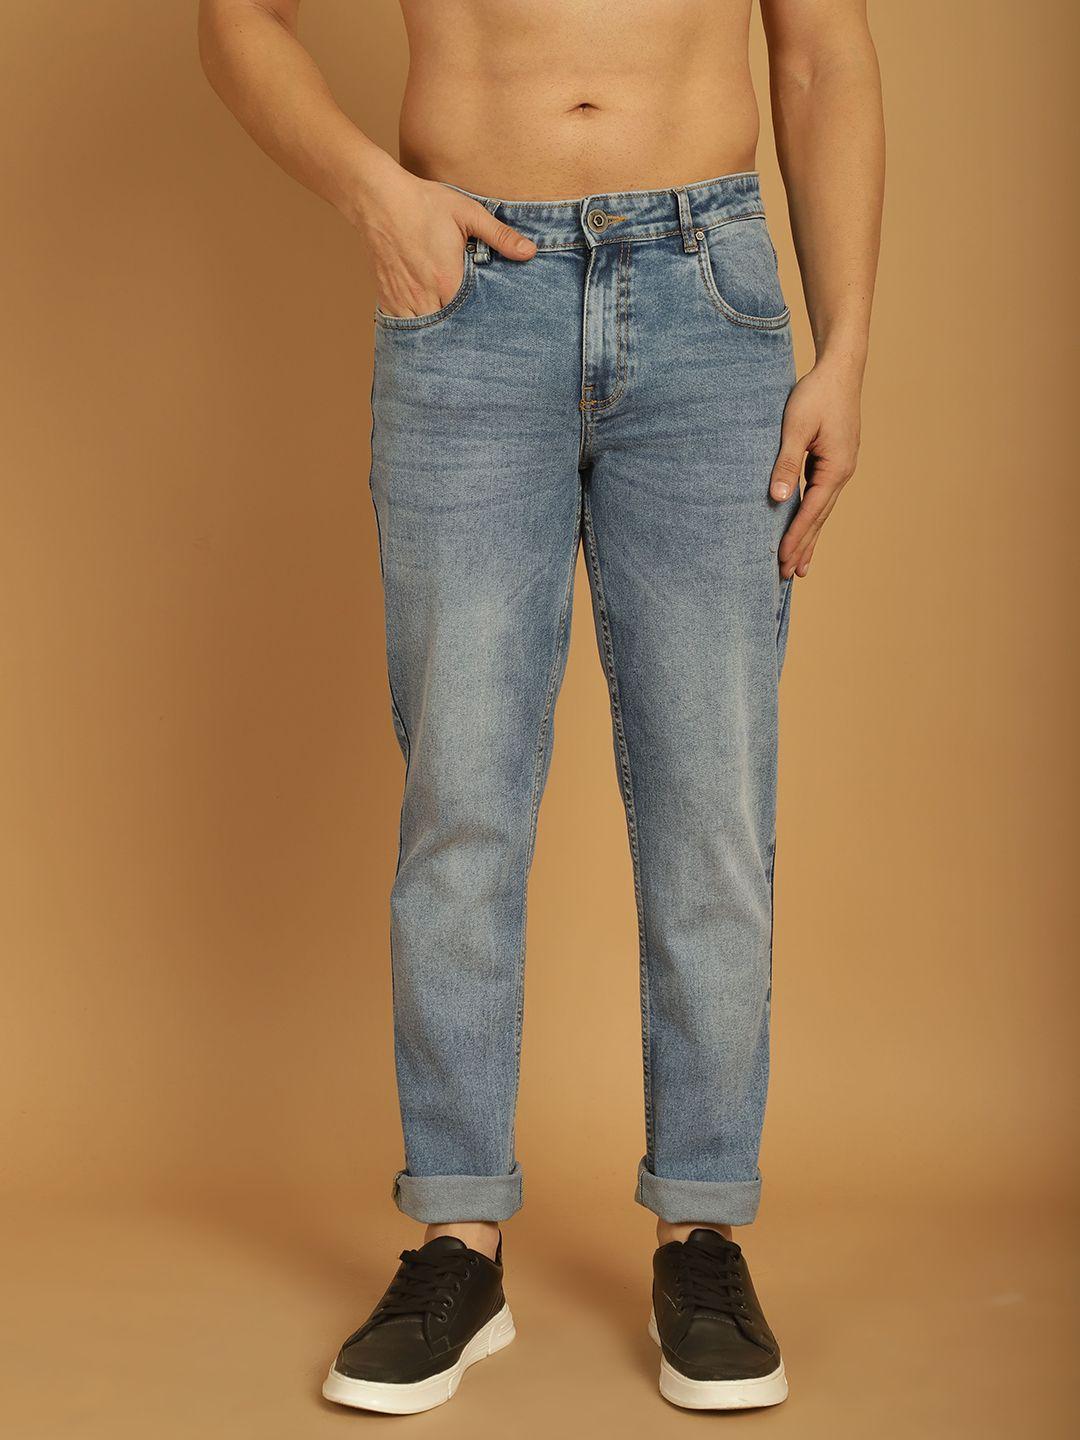 the roadster lifestyle co.  men blue clean look mid-rise stretchable jeans